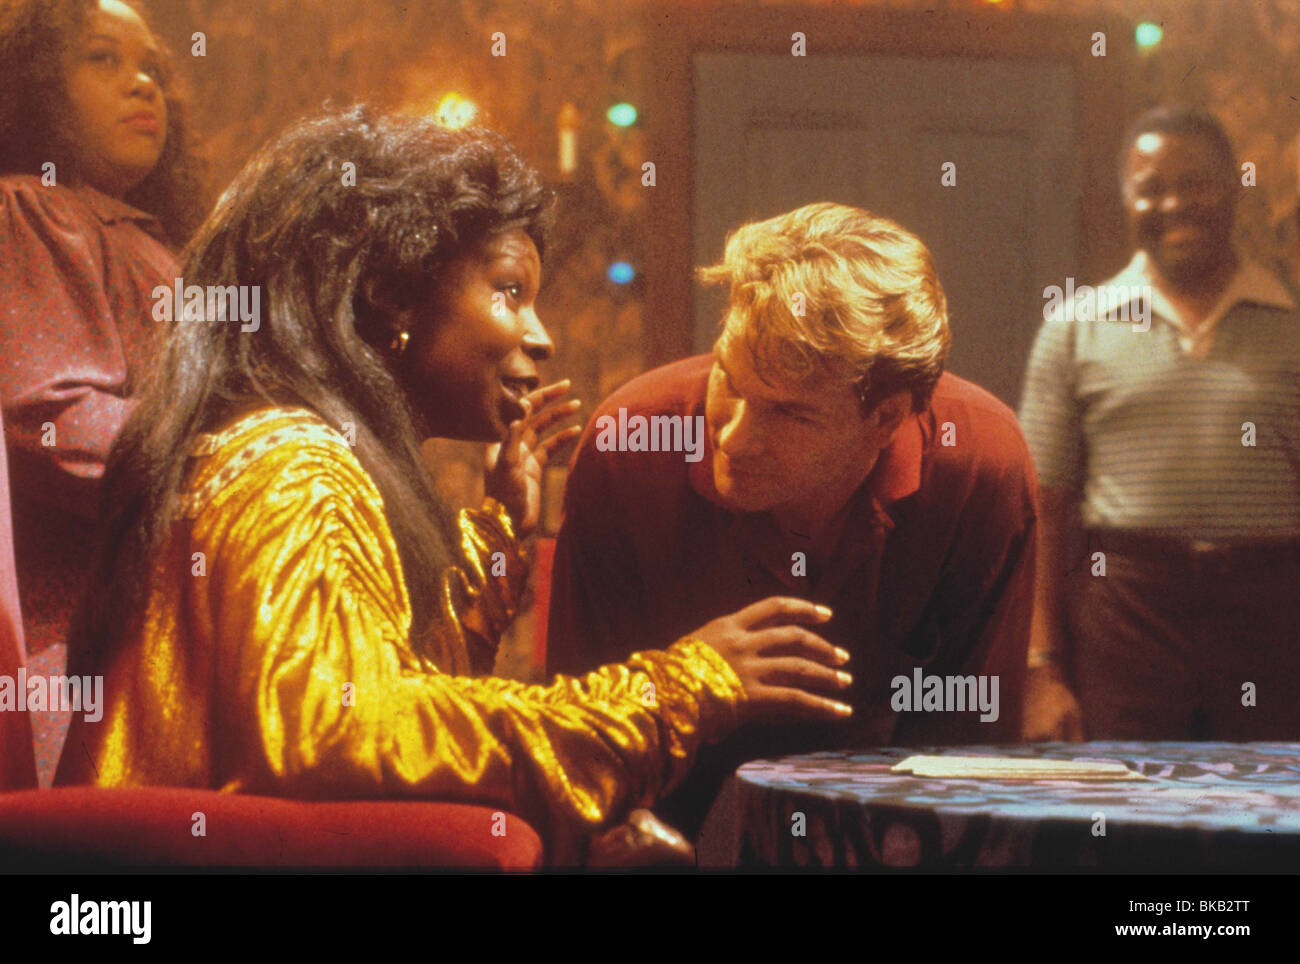 GHOST (1990), Whoopi Goldberg, PATRICK SWAYZE SGH 103 Banque D'Images